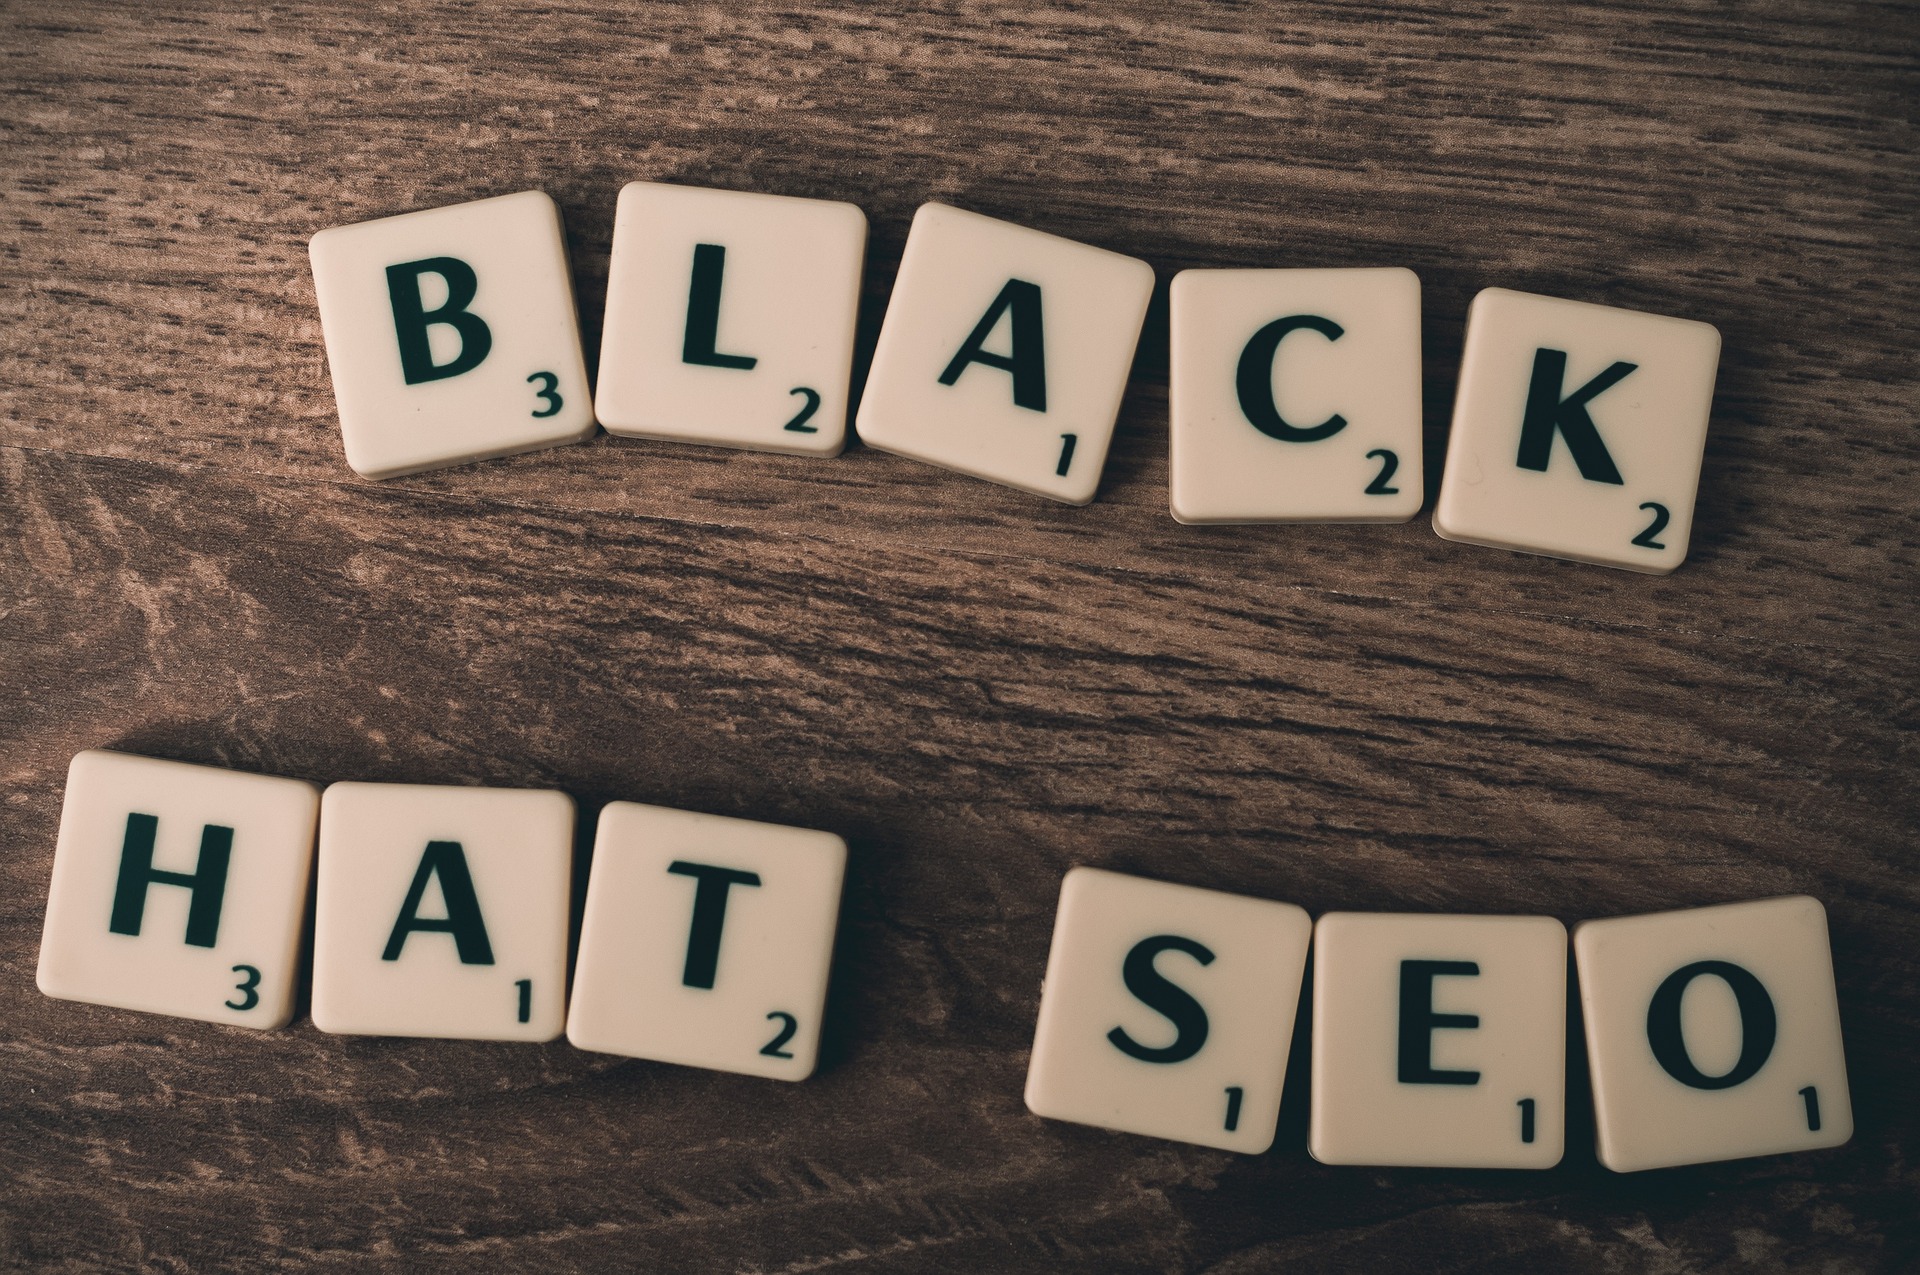 Black hat SEO can have drastic consequences if not done right.